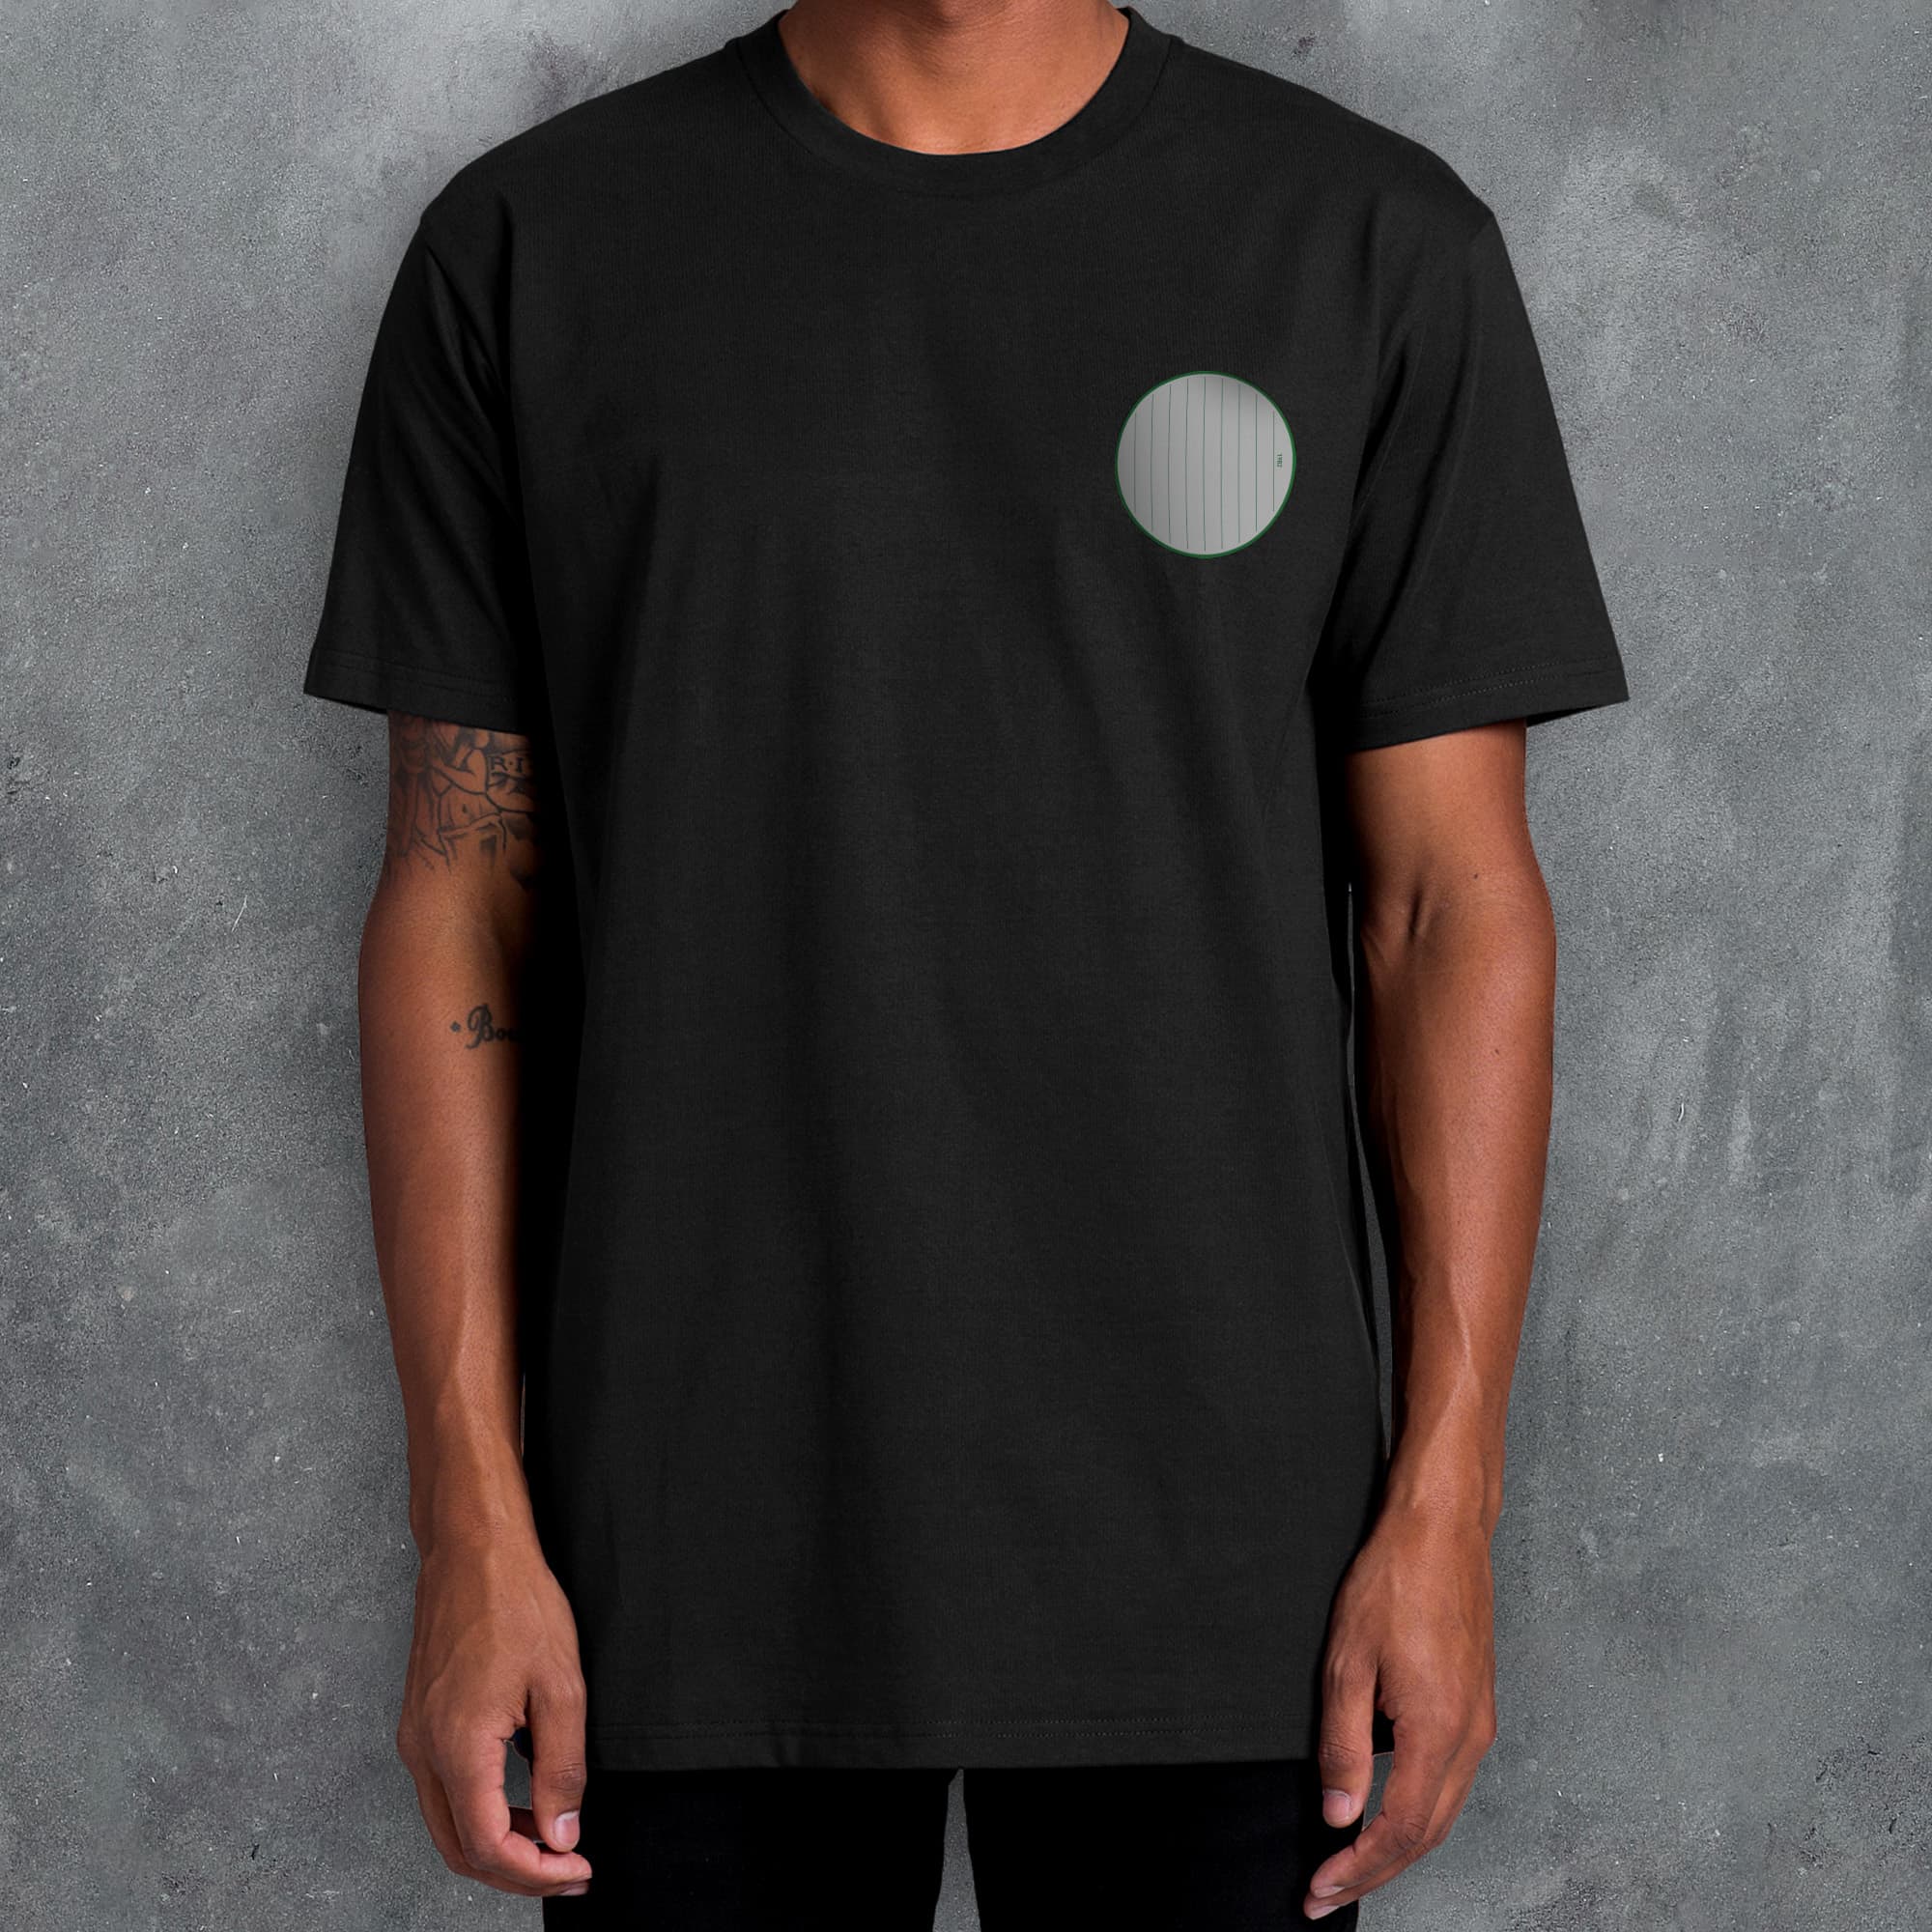 a man wearing a black t - shirt with a green circle on it